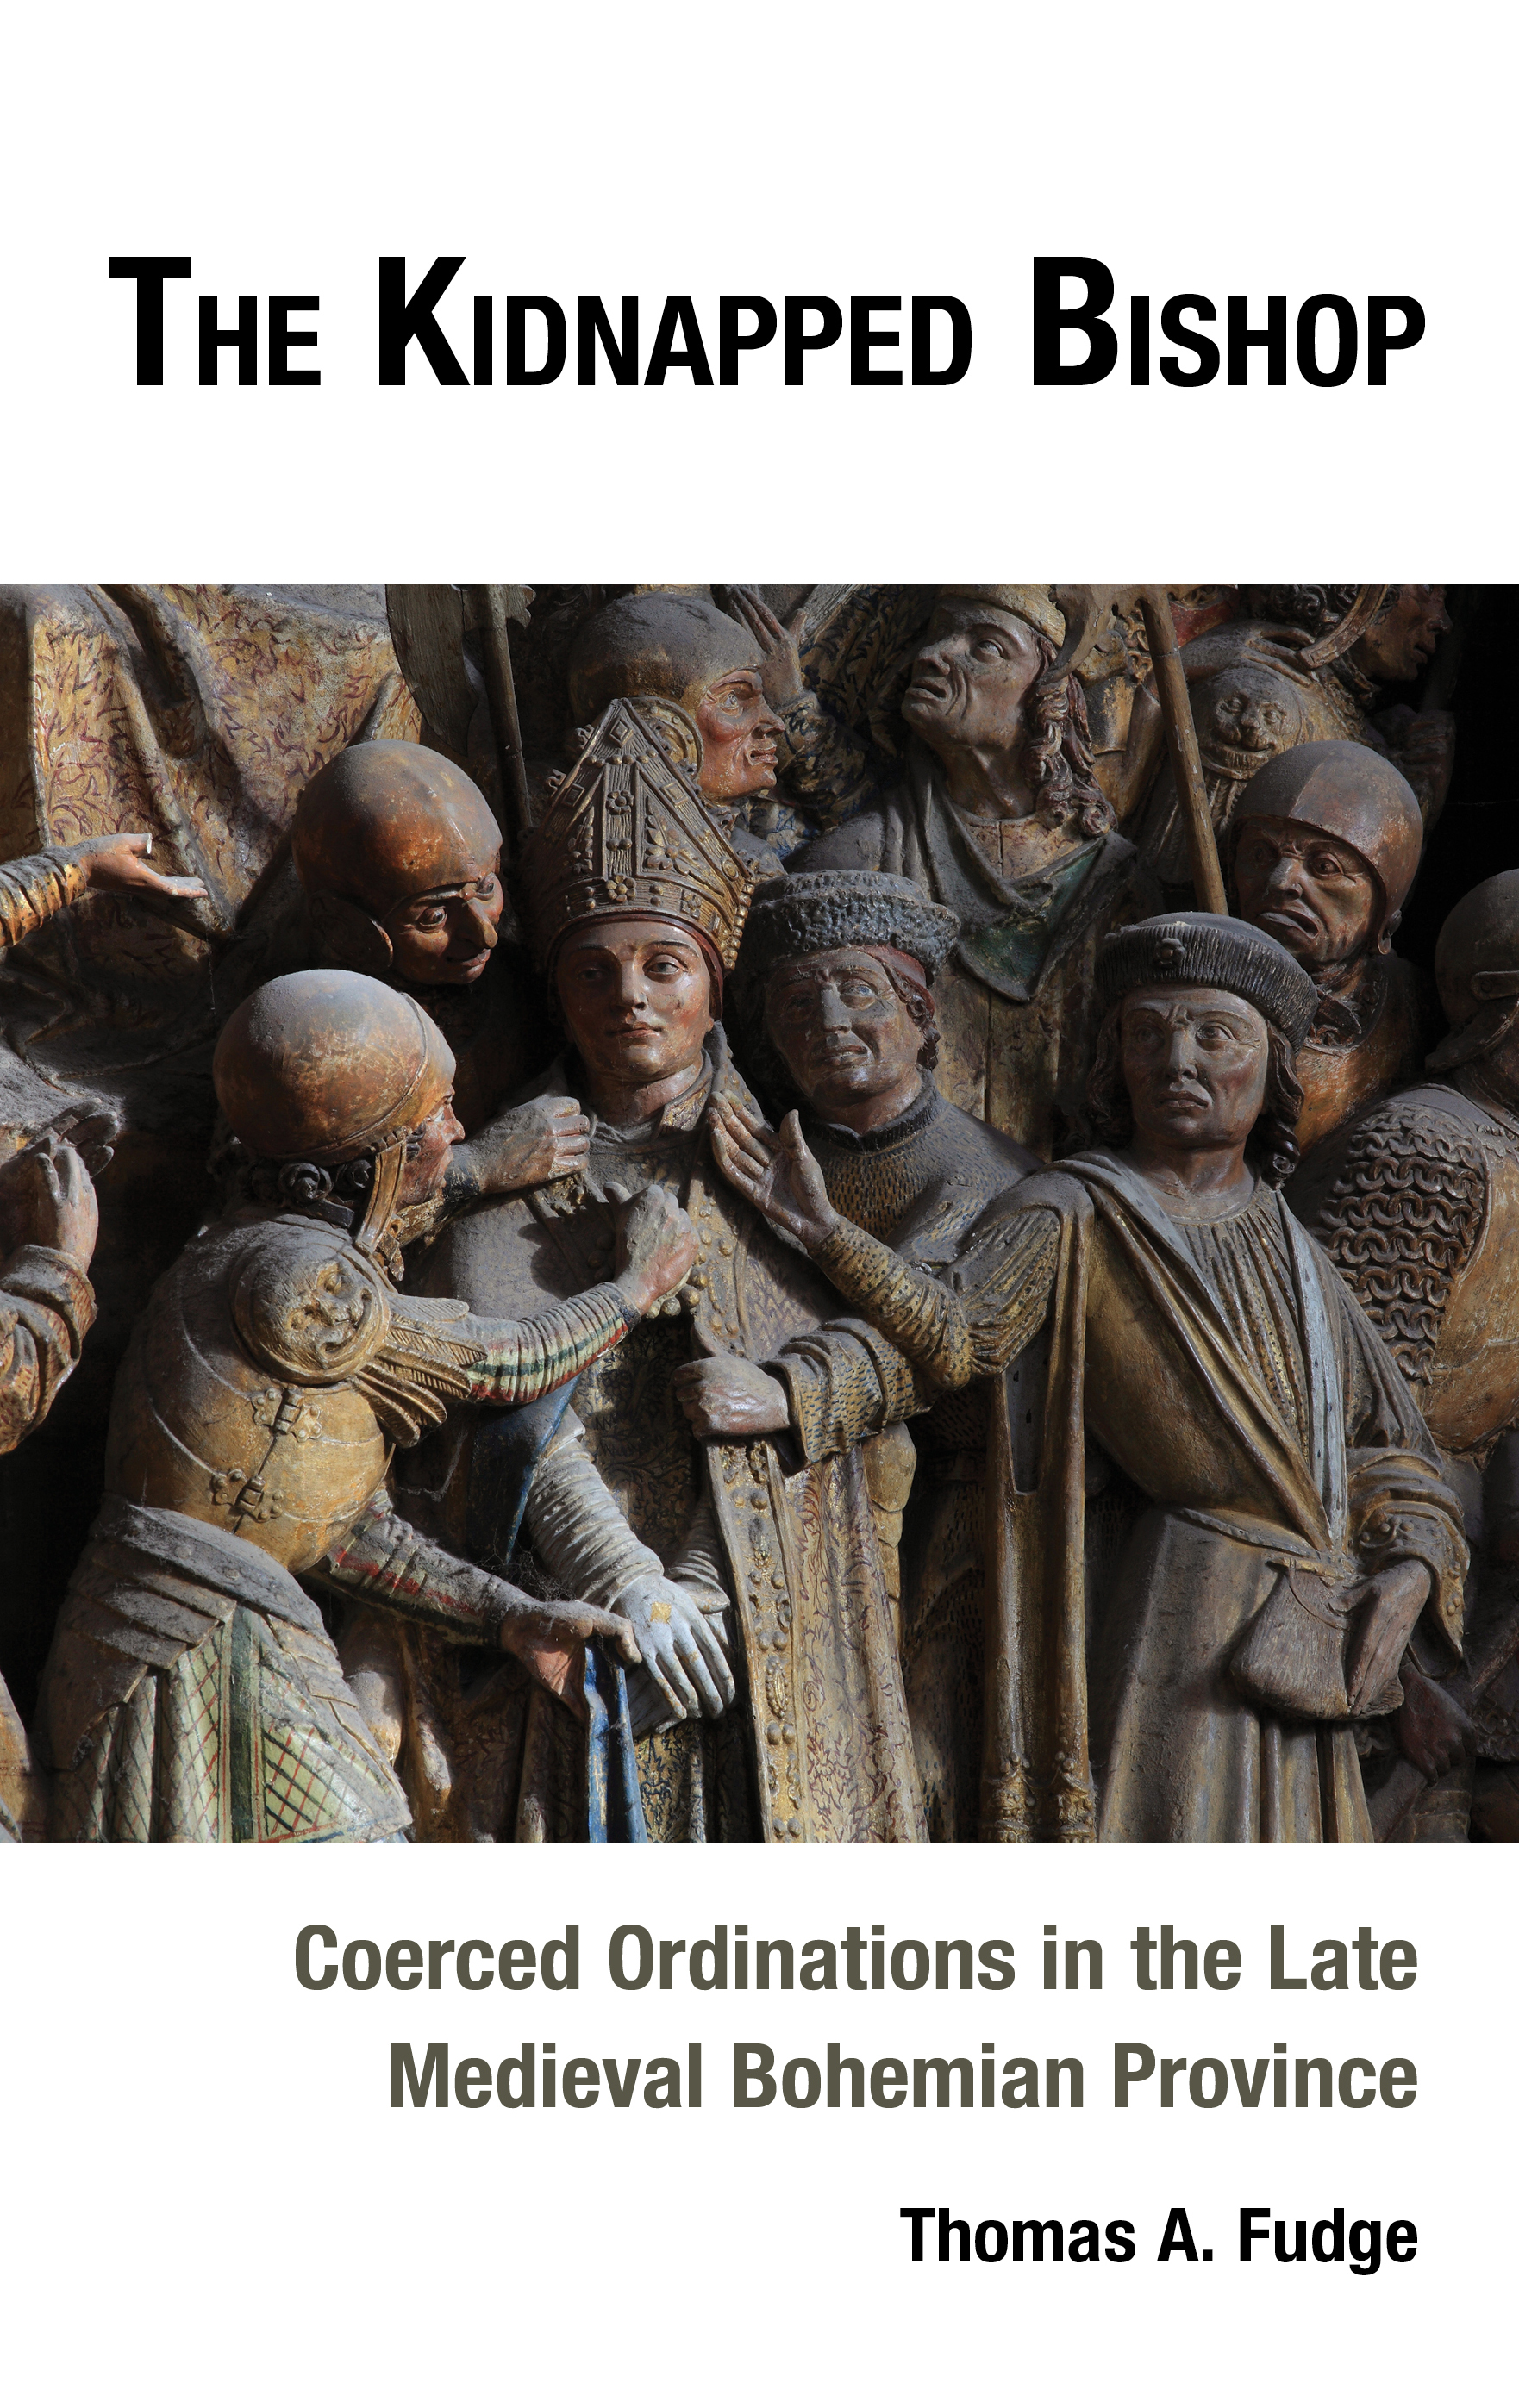 The Kidnapped Bishop: Coerced Ordinations in the Late Medieval Bohemian Province